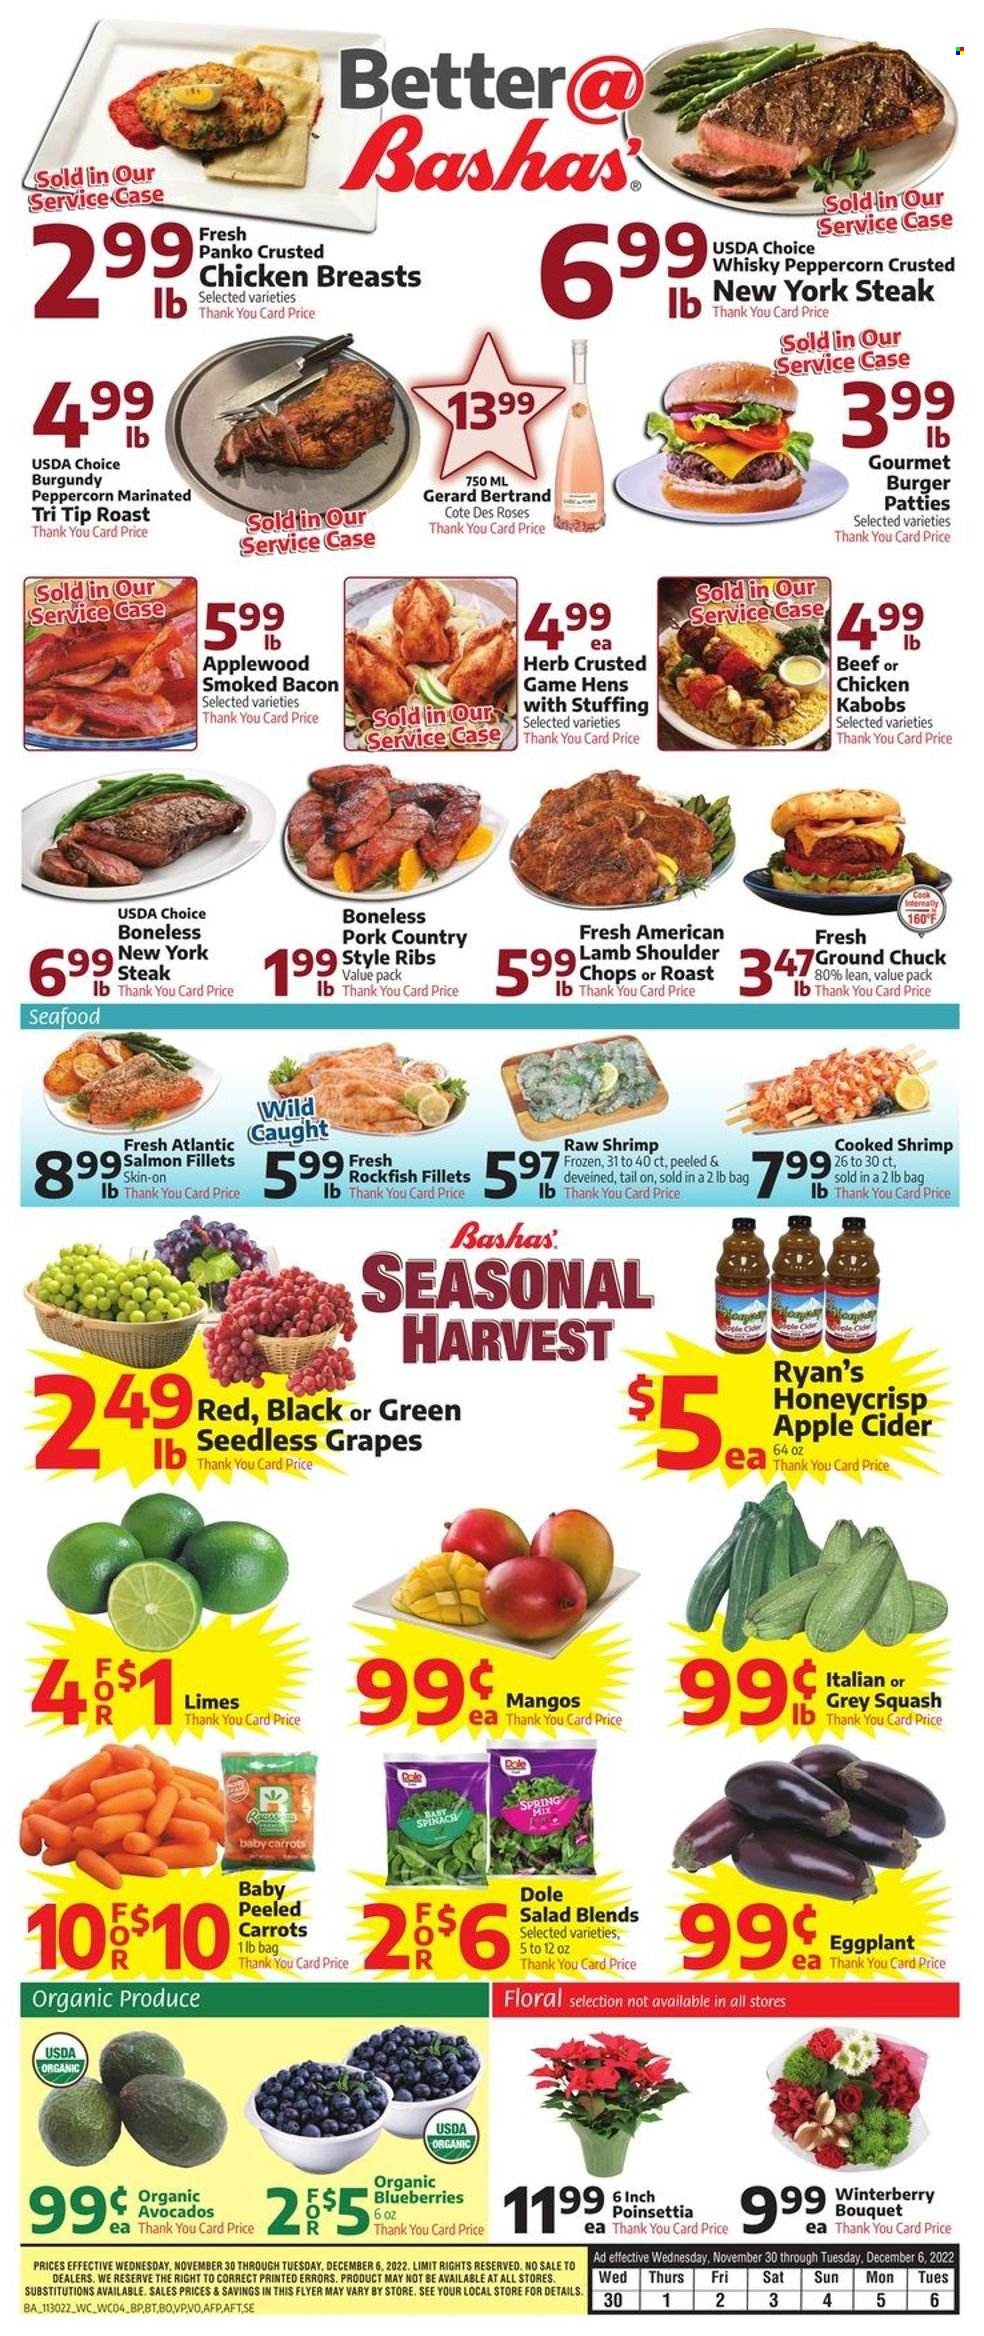 thumbnail - Bashas' Flyer - 11/30/2022 - 12/06/2022 - Sales products - panko breadcrumbs, carrots, salad, Dole, eggplant, avocado, blueberries, grapes, limes, seedless grapes, rockfish, salmon, salmon fillet, seafood, shrimps, hamburger, bacon, herbs, apple cider, whisky, cider, chicken breasts, ground chuck, steak, burger patties, pork ribs, country style ribs, lamb meat, lamb shoulder, poinsettia, bouquet, rose. Page 4.